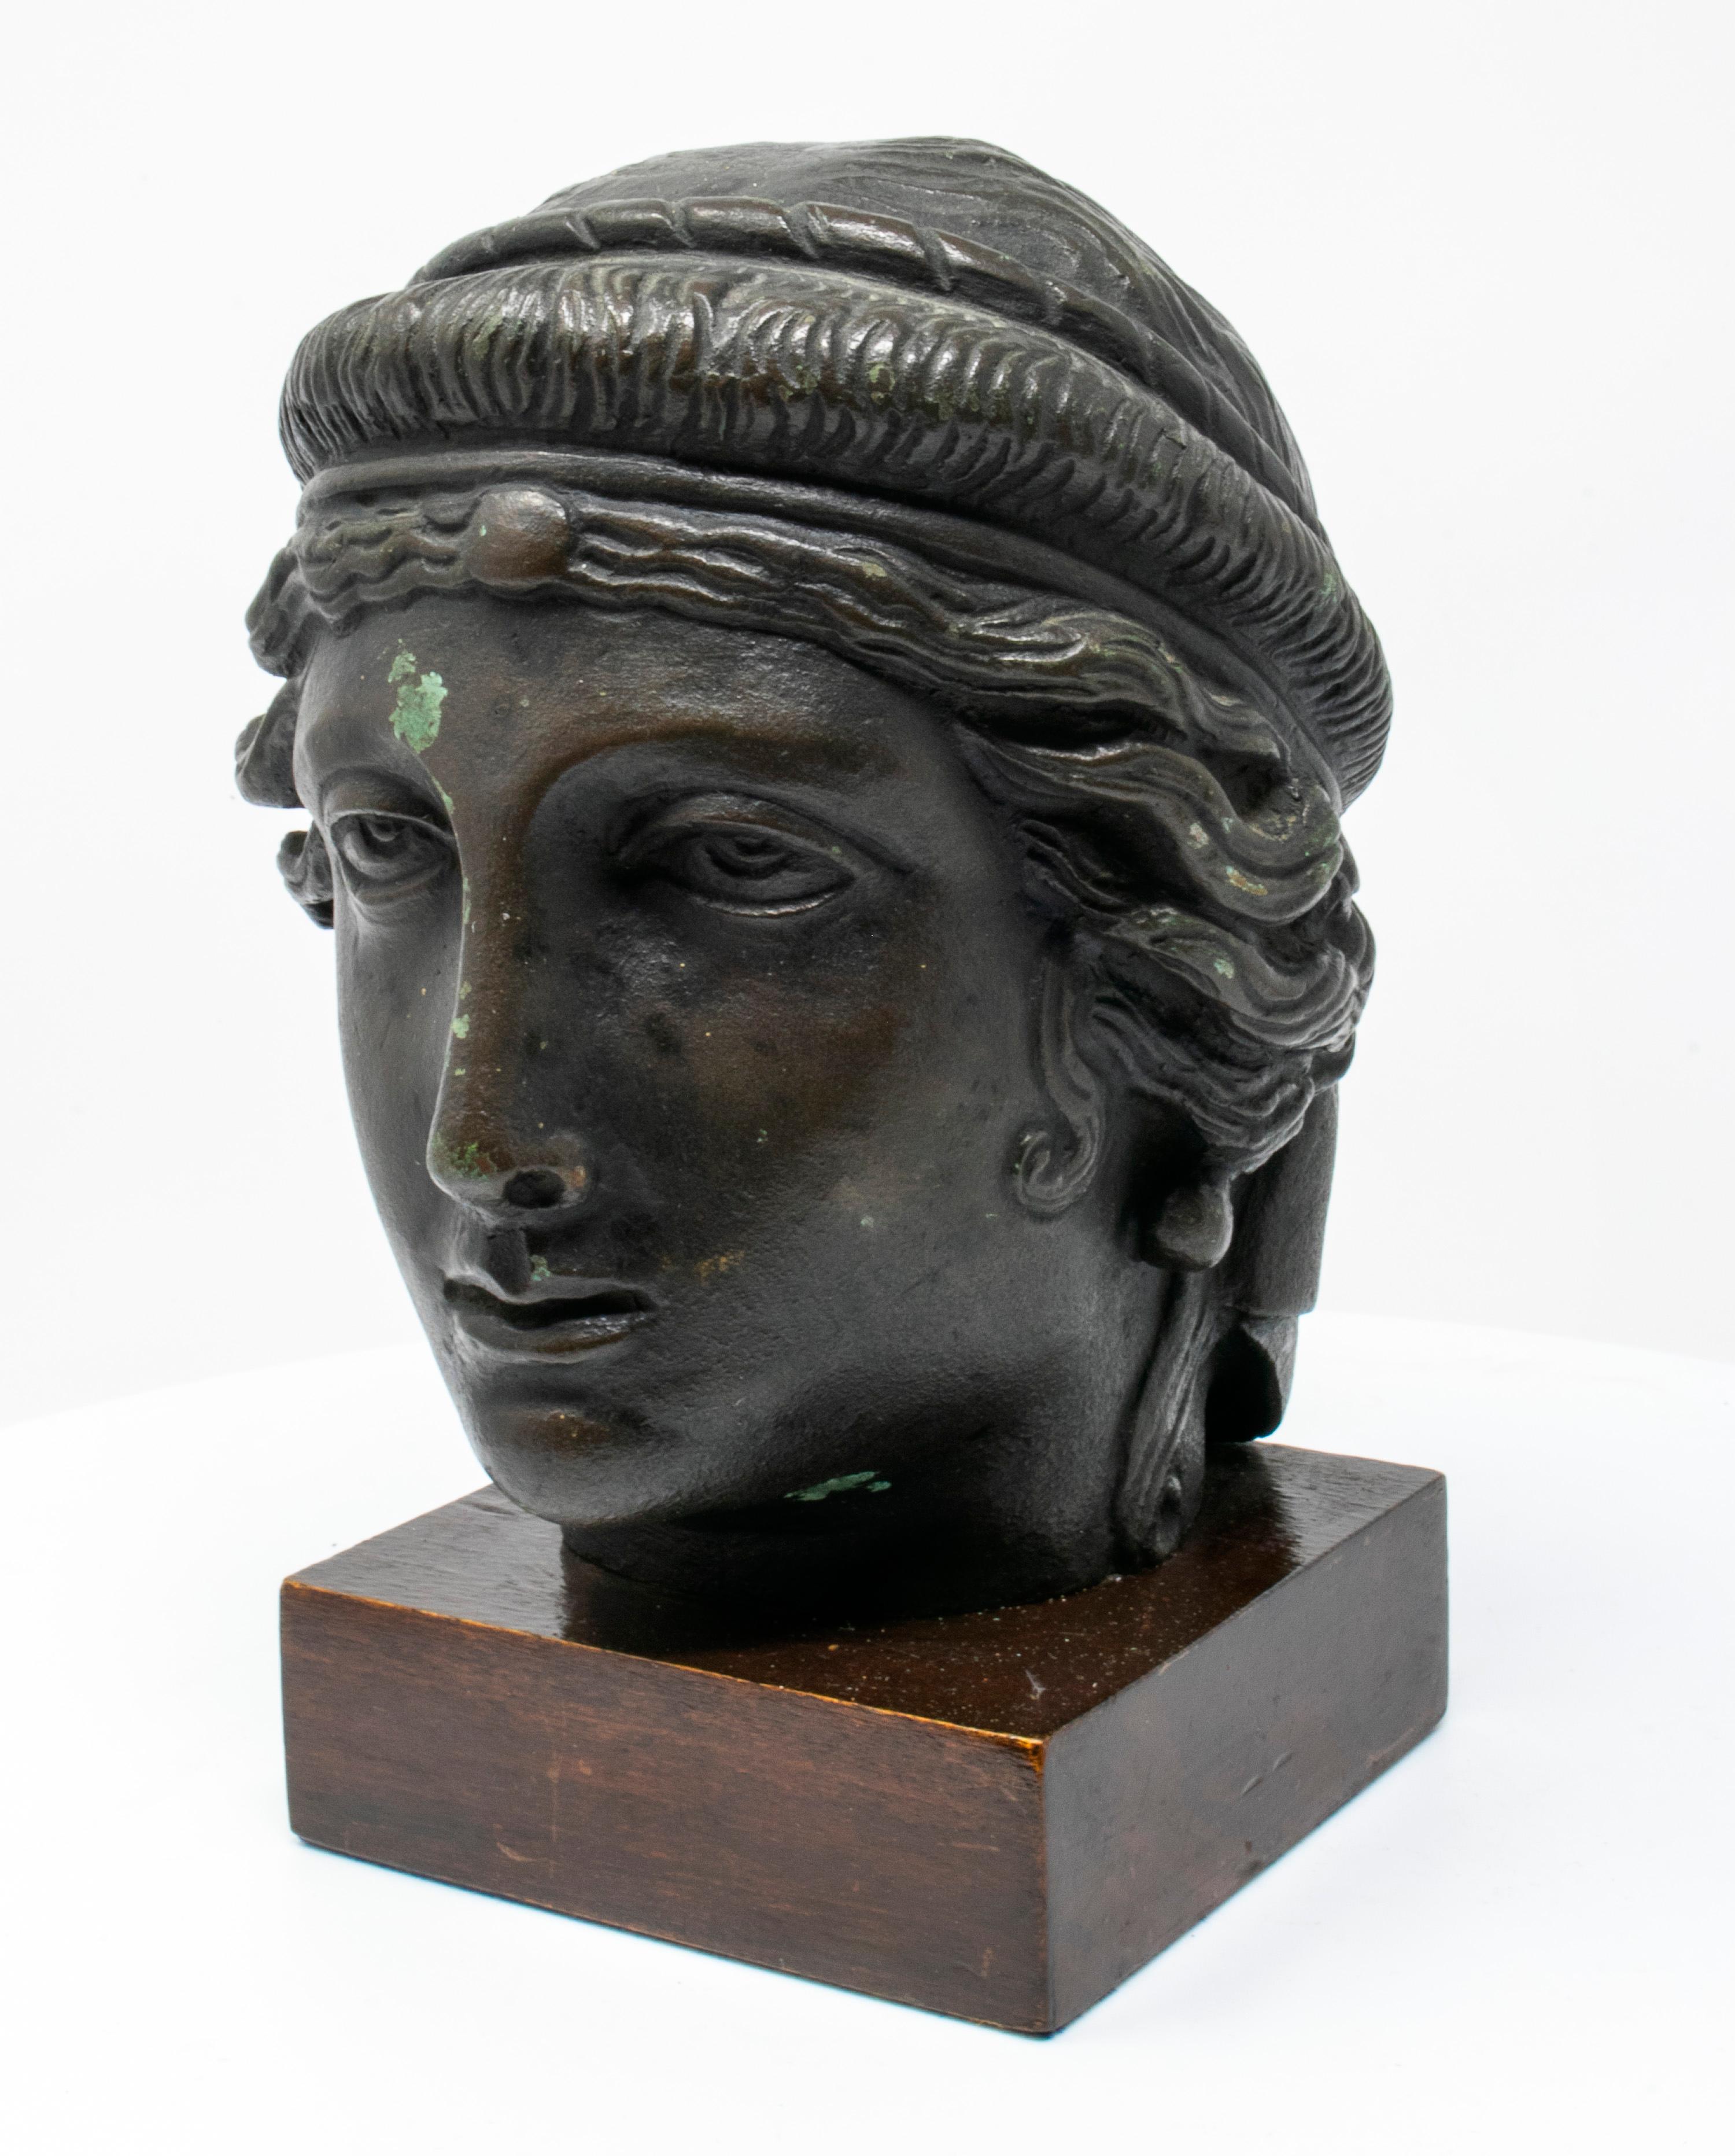 19th century Italian classical Greek bust in bronze on a wooden base.